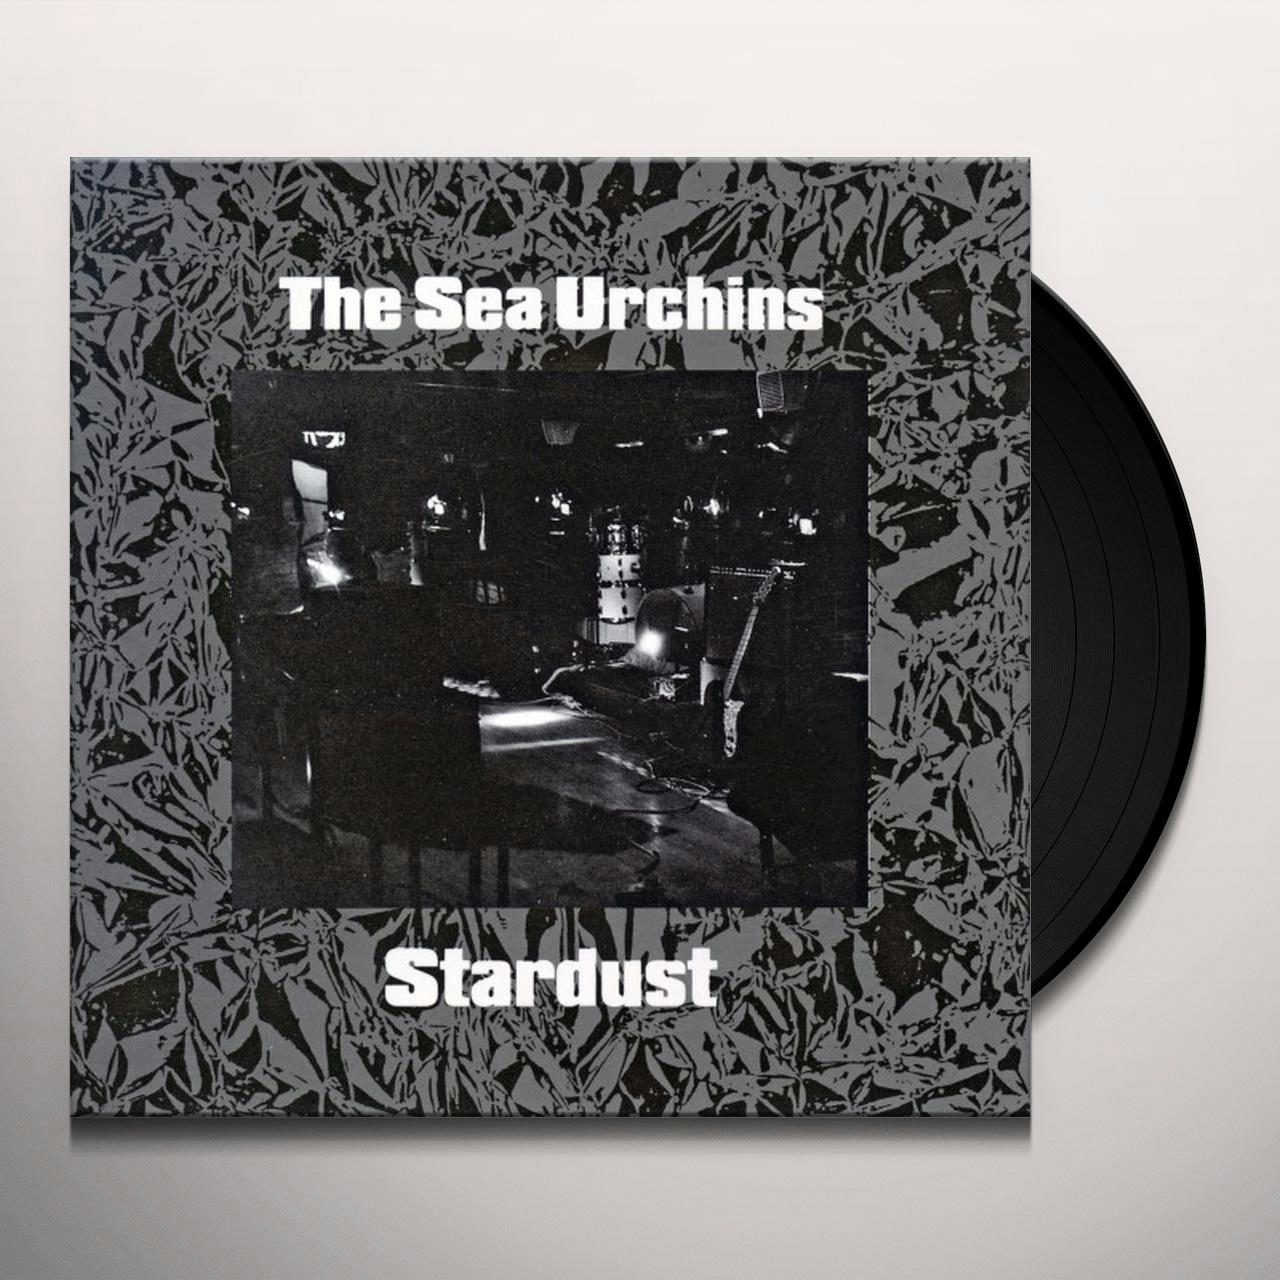 The Sea Urchins Stardust Limited Edition